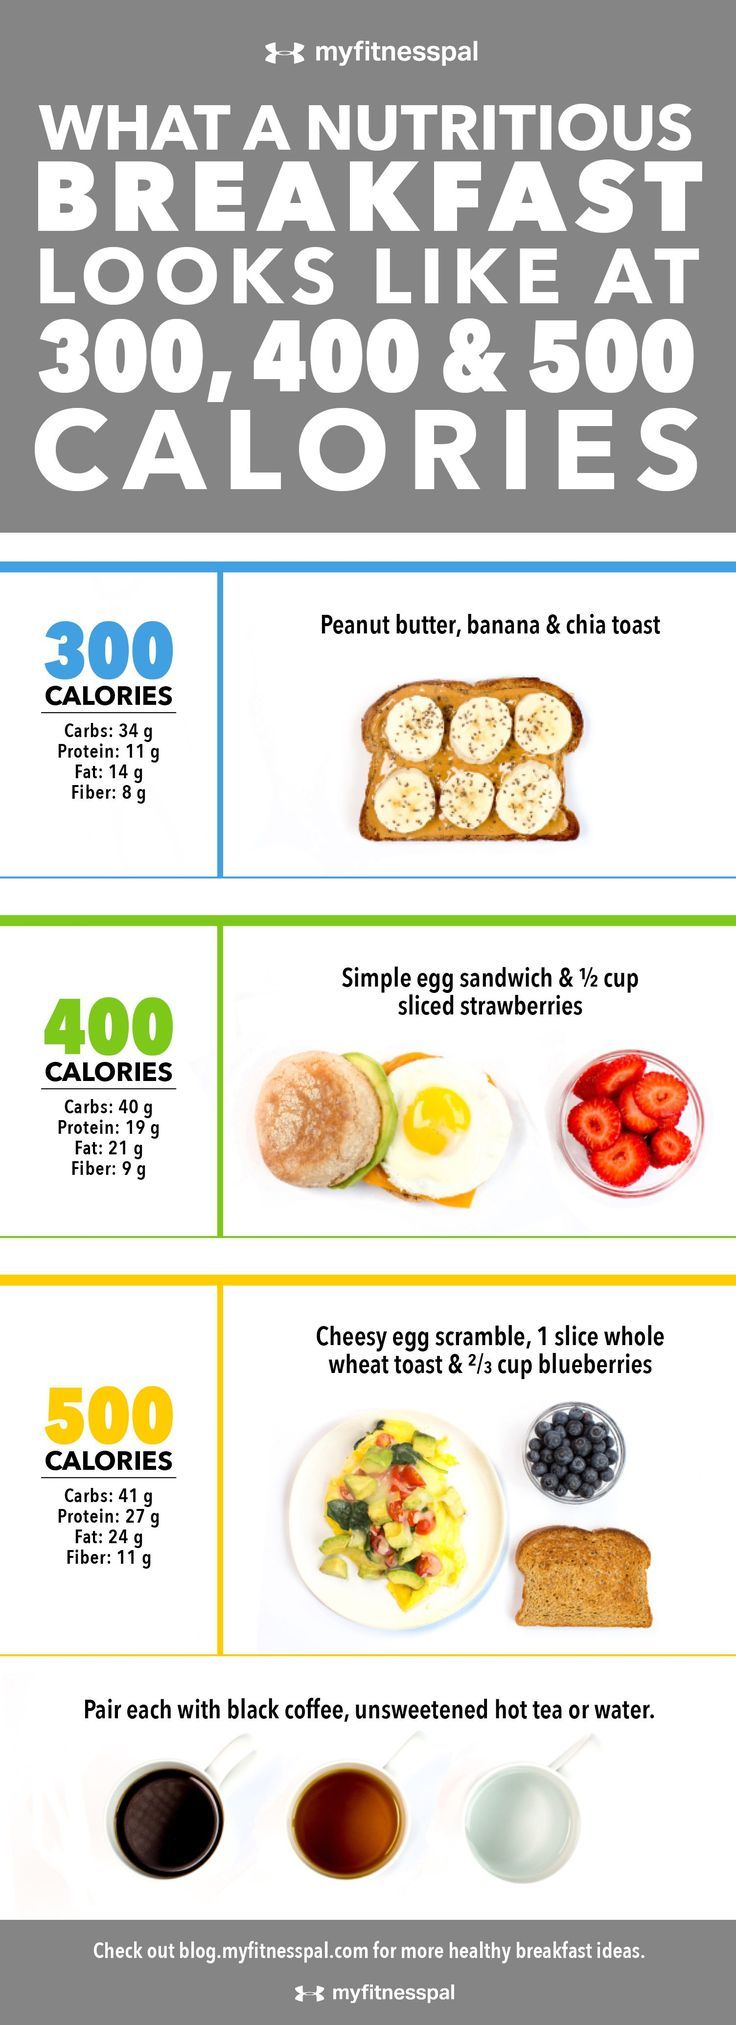 What a Nutritious Breakfast Looks Like at 300, 400 & 500 Calories [Infographic] | Weight Loss | MyFitnessPal